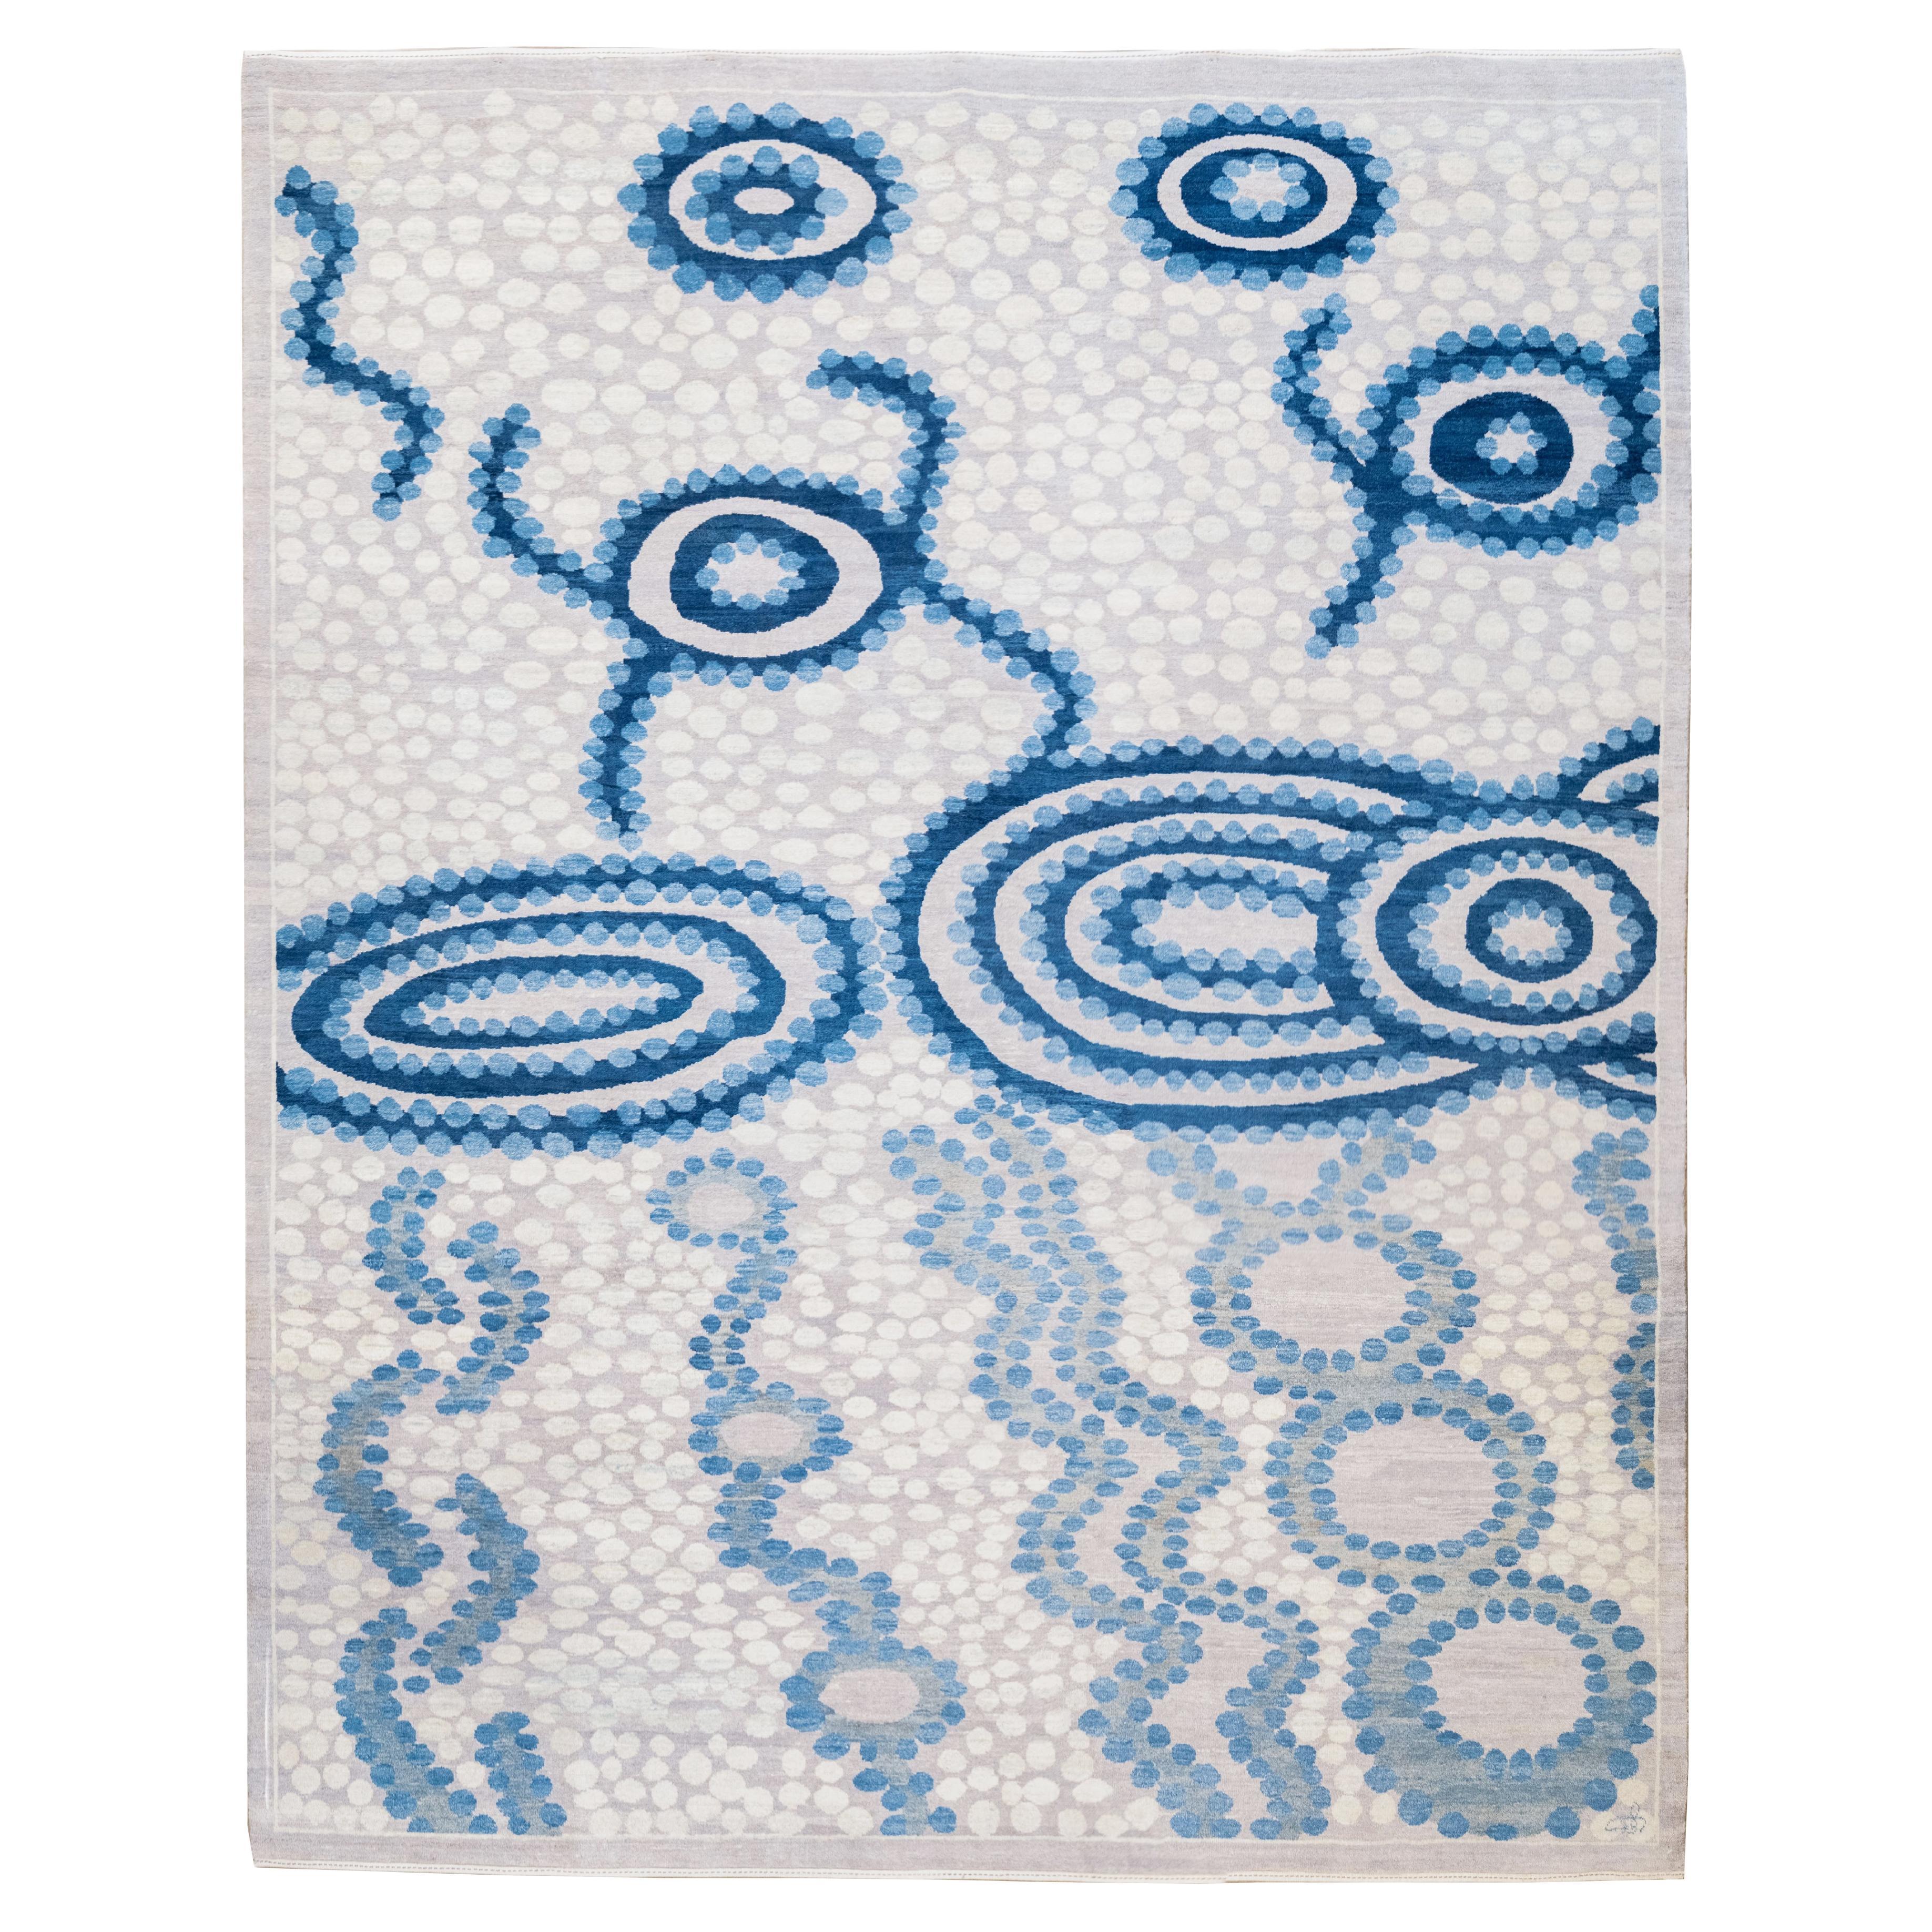 Blue and Cream Wool Contemporary Persian Carpet, Hand-Knotted, 8' x 10' For Sale